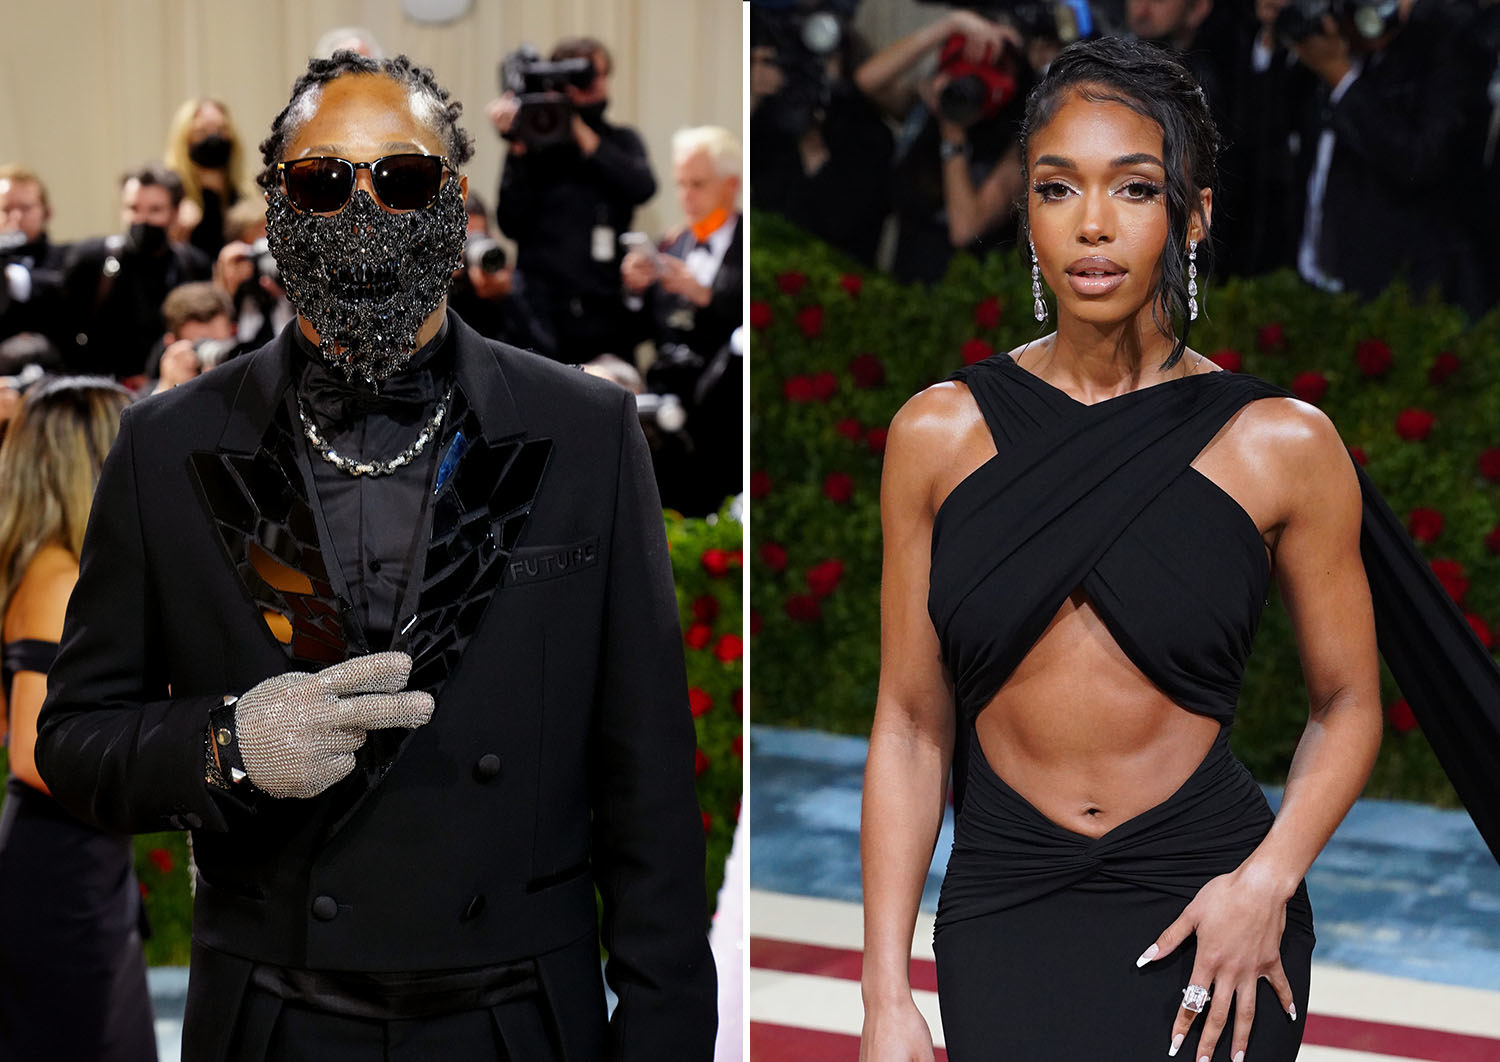 Future giving a peace sign; Lori Harvey stands and smiles on the red carpet